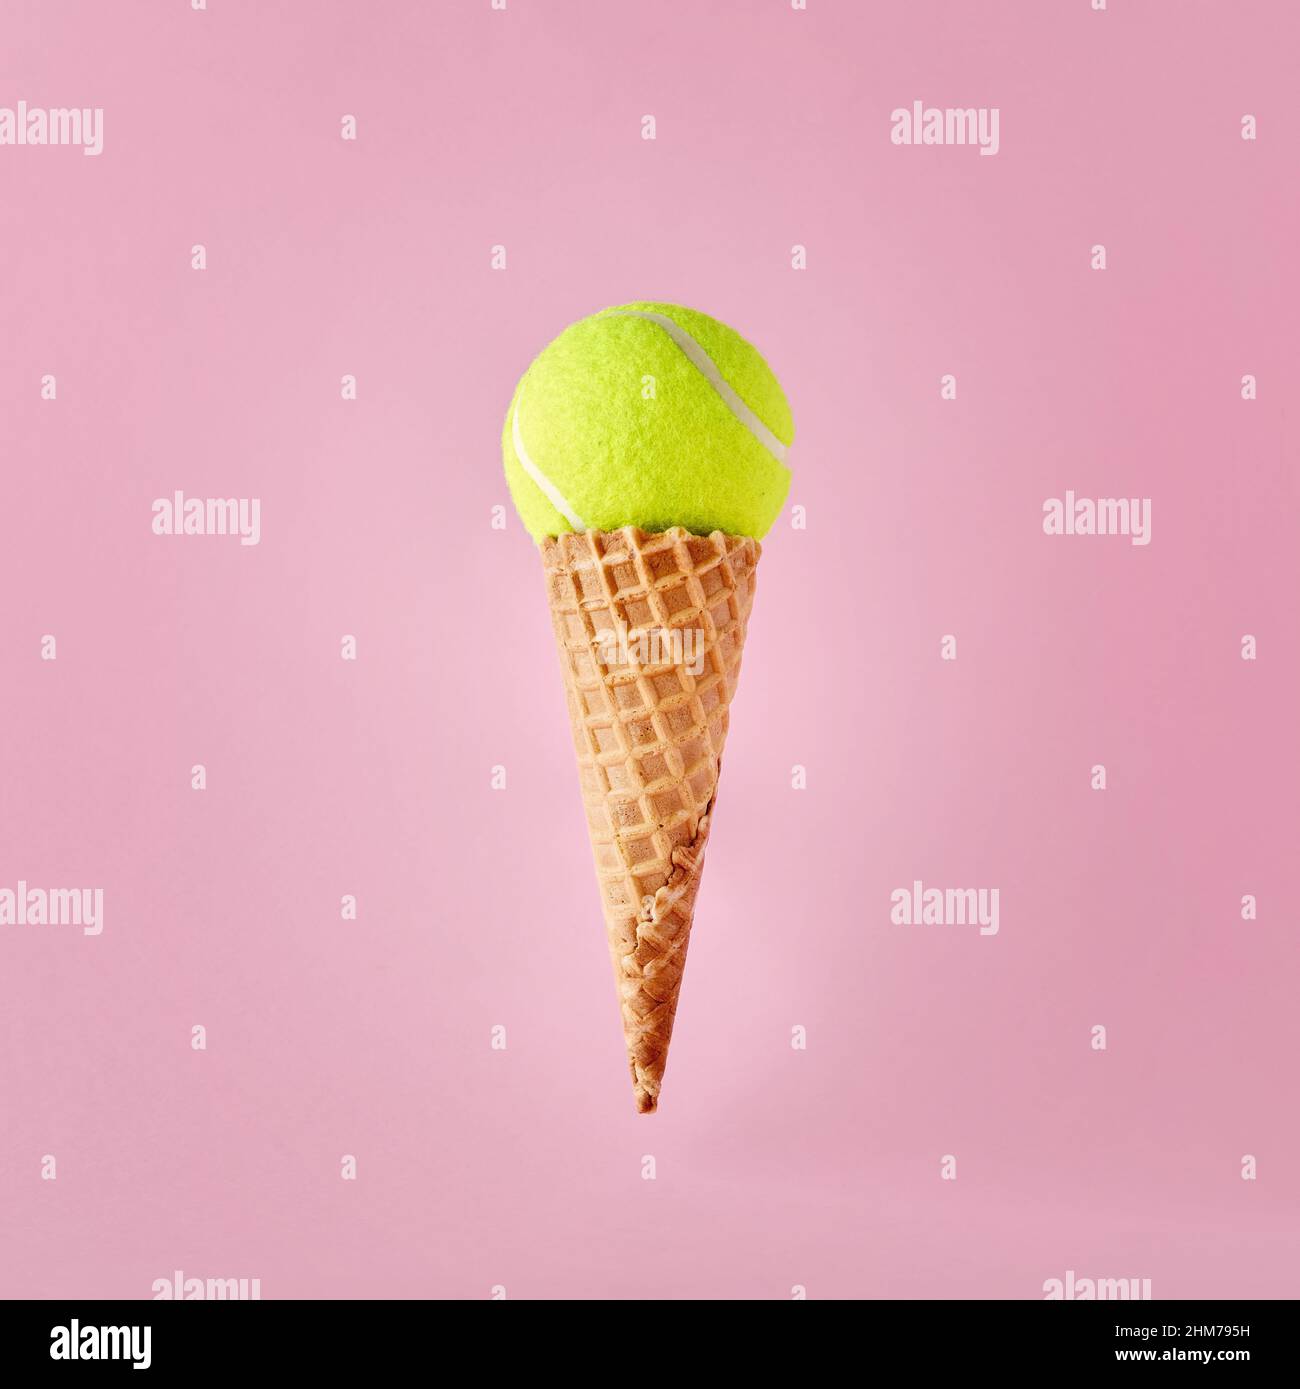 Tennis ball on ice cream cone on pink background. Minimalistic sports, fun and recreation concept. Stock Photo